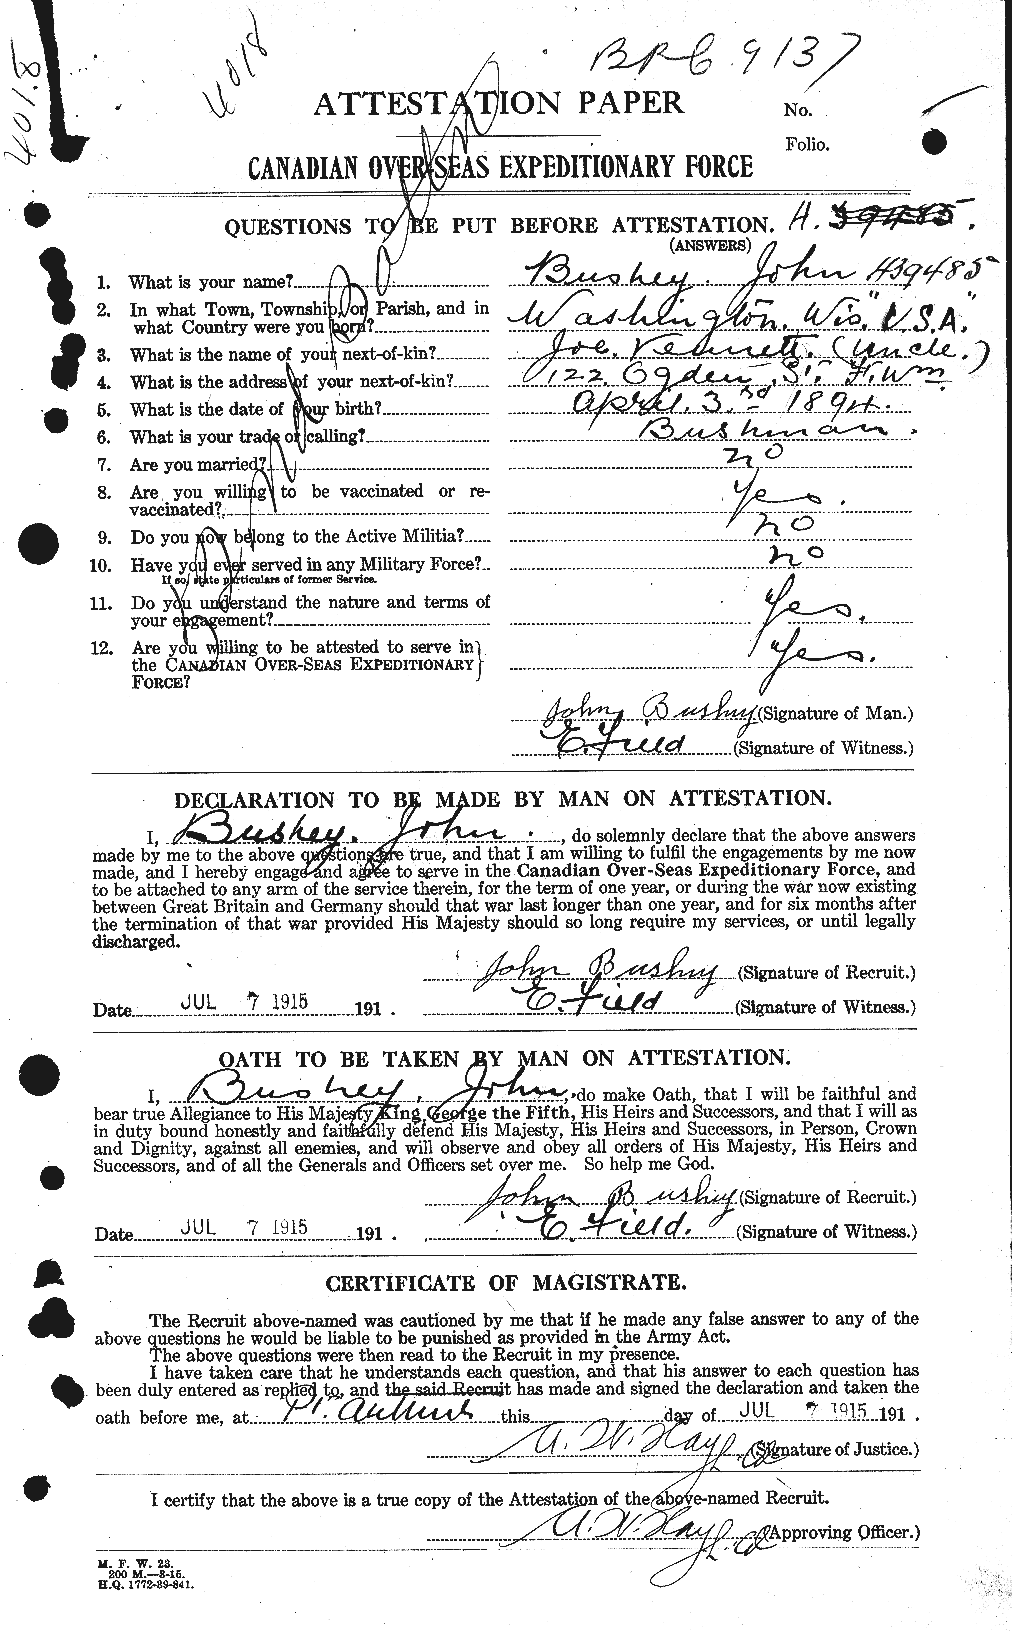 Personnel Records of the First World War - CEF 274498a